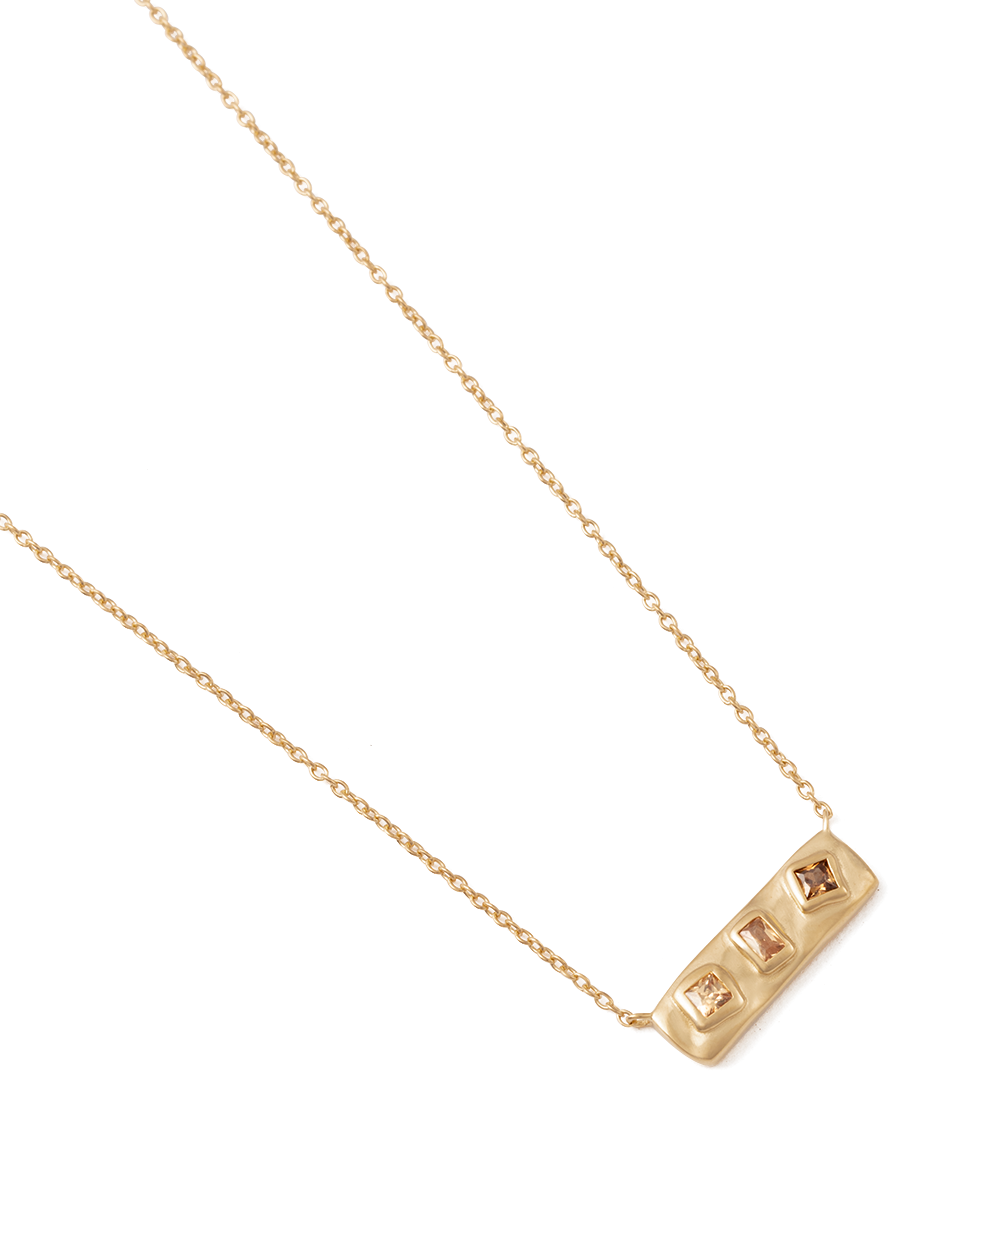 SUN DANCE NECKLACE (18K GOLD PLATED)